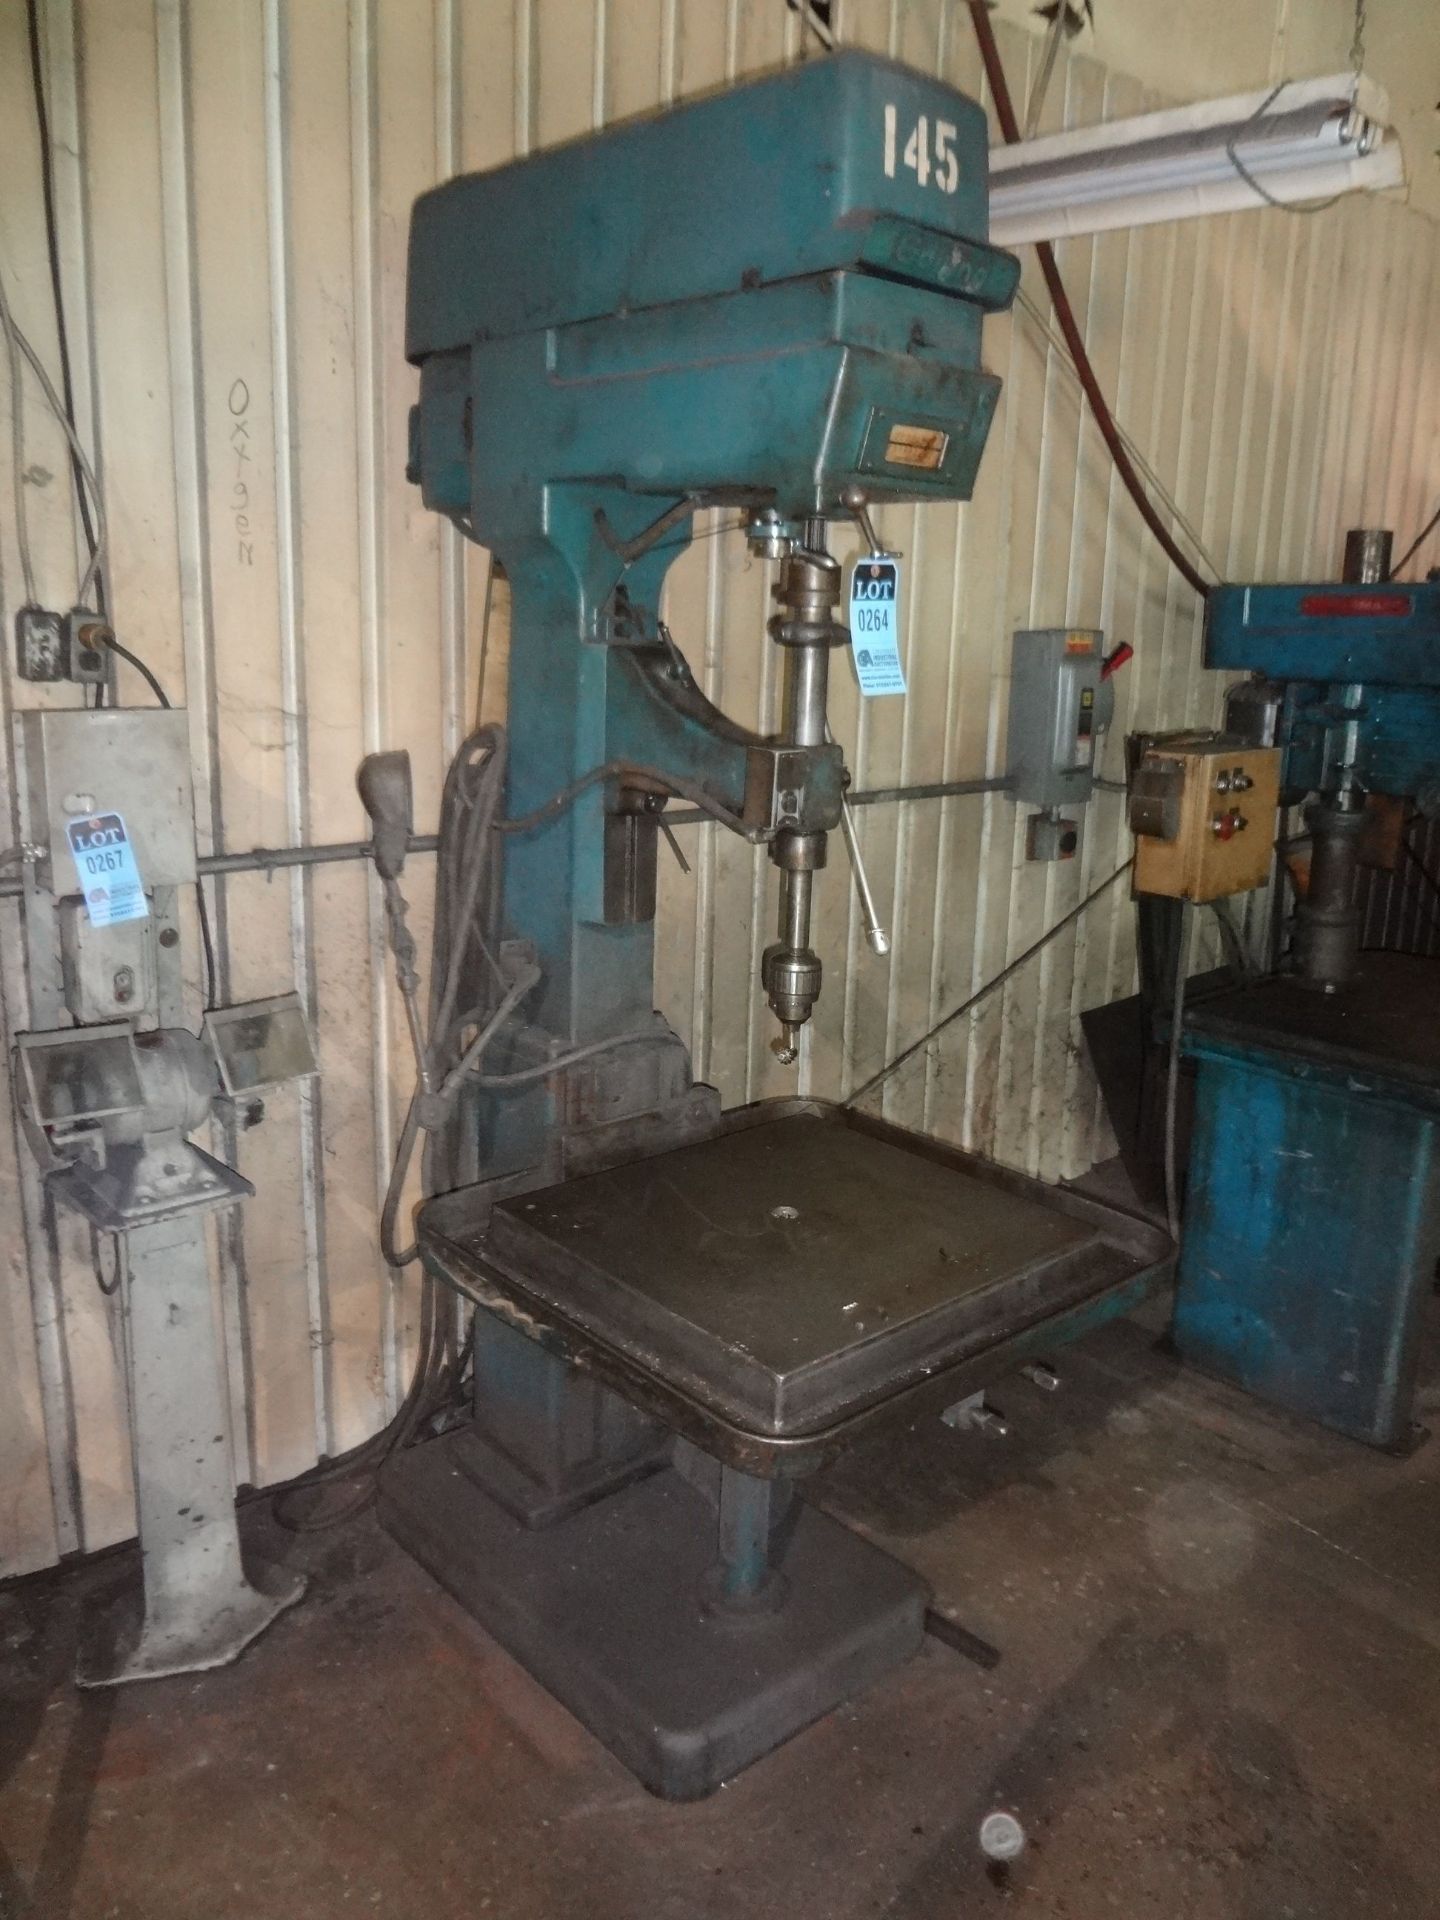 32" EDLUND MODEL 2115 TABLE DRILL; S/N N/A, 75-1,800 RPM SPINDLE SPEED, 24" X 28" TABLE - Image 2 of 2